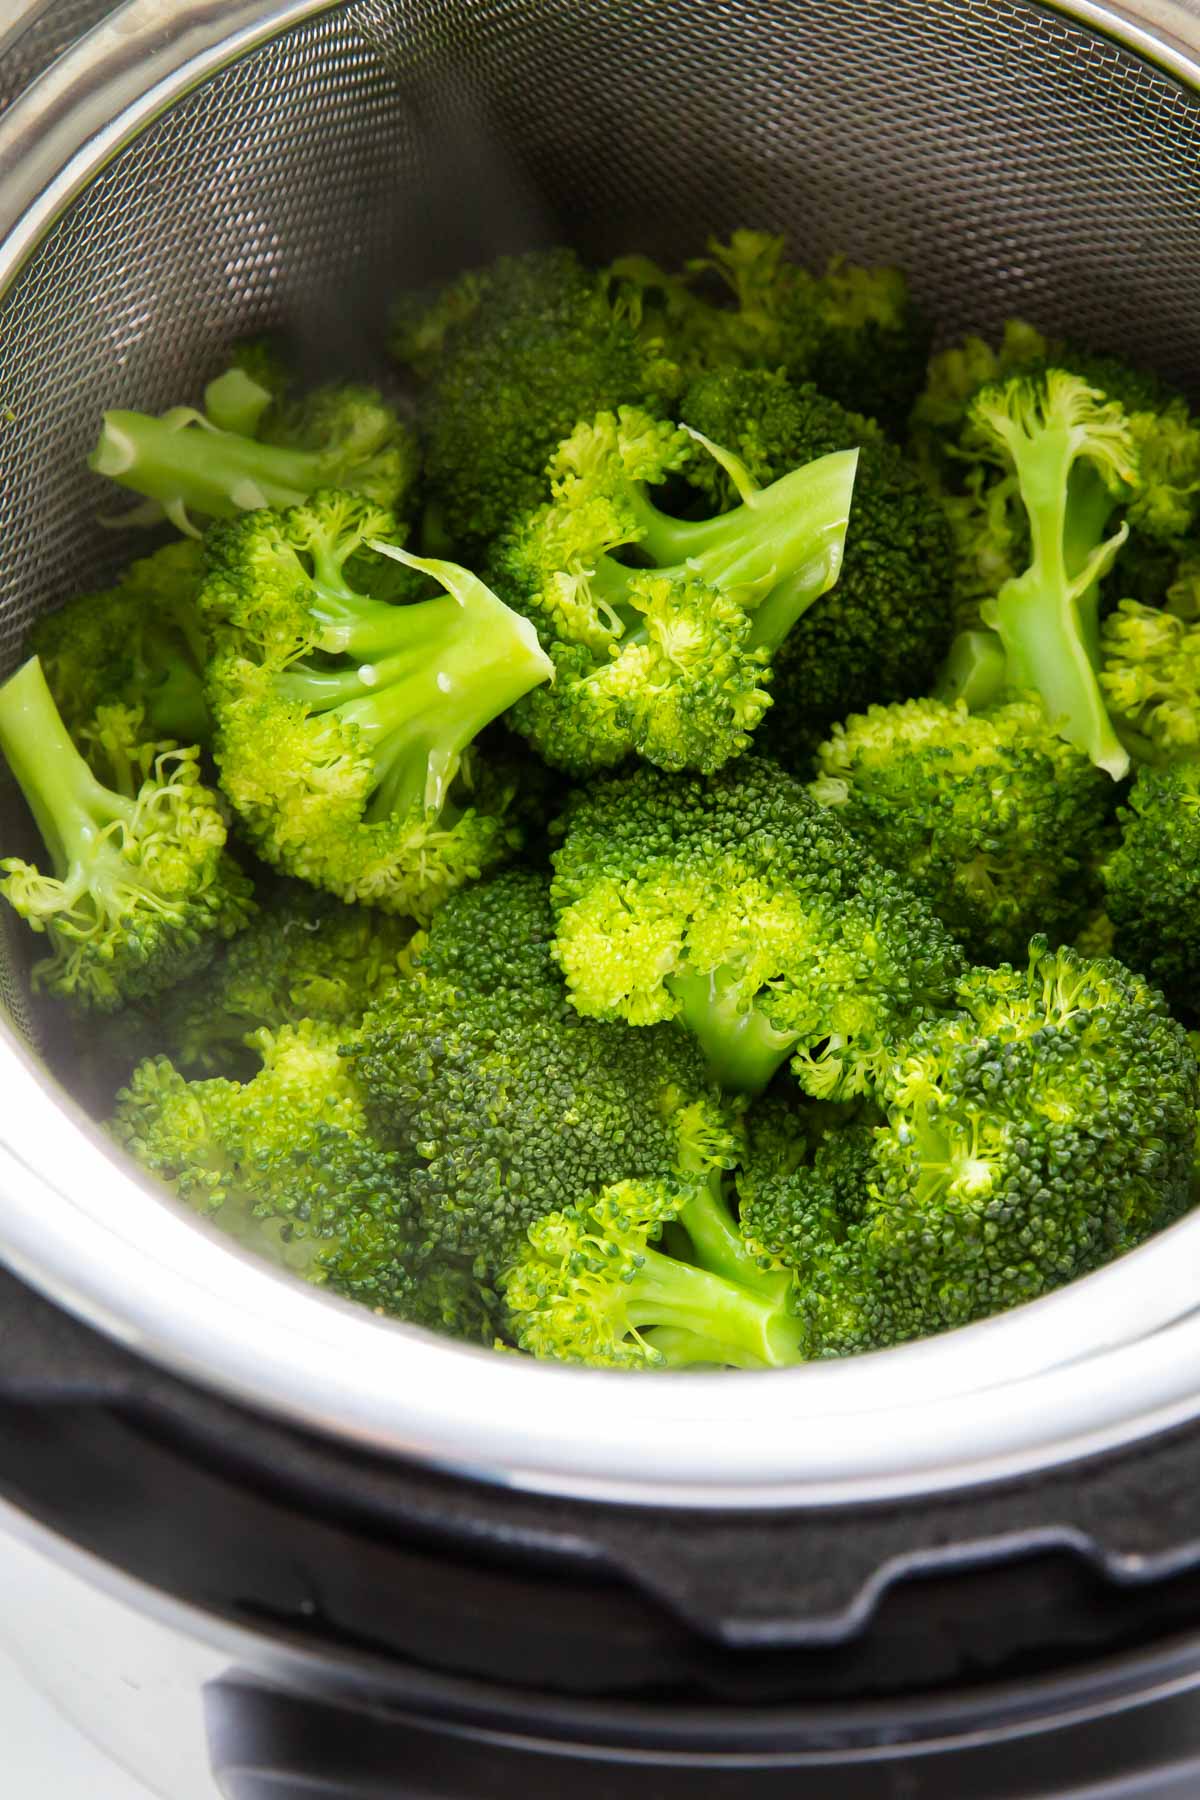 Steamed broccoli in instant pot.